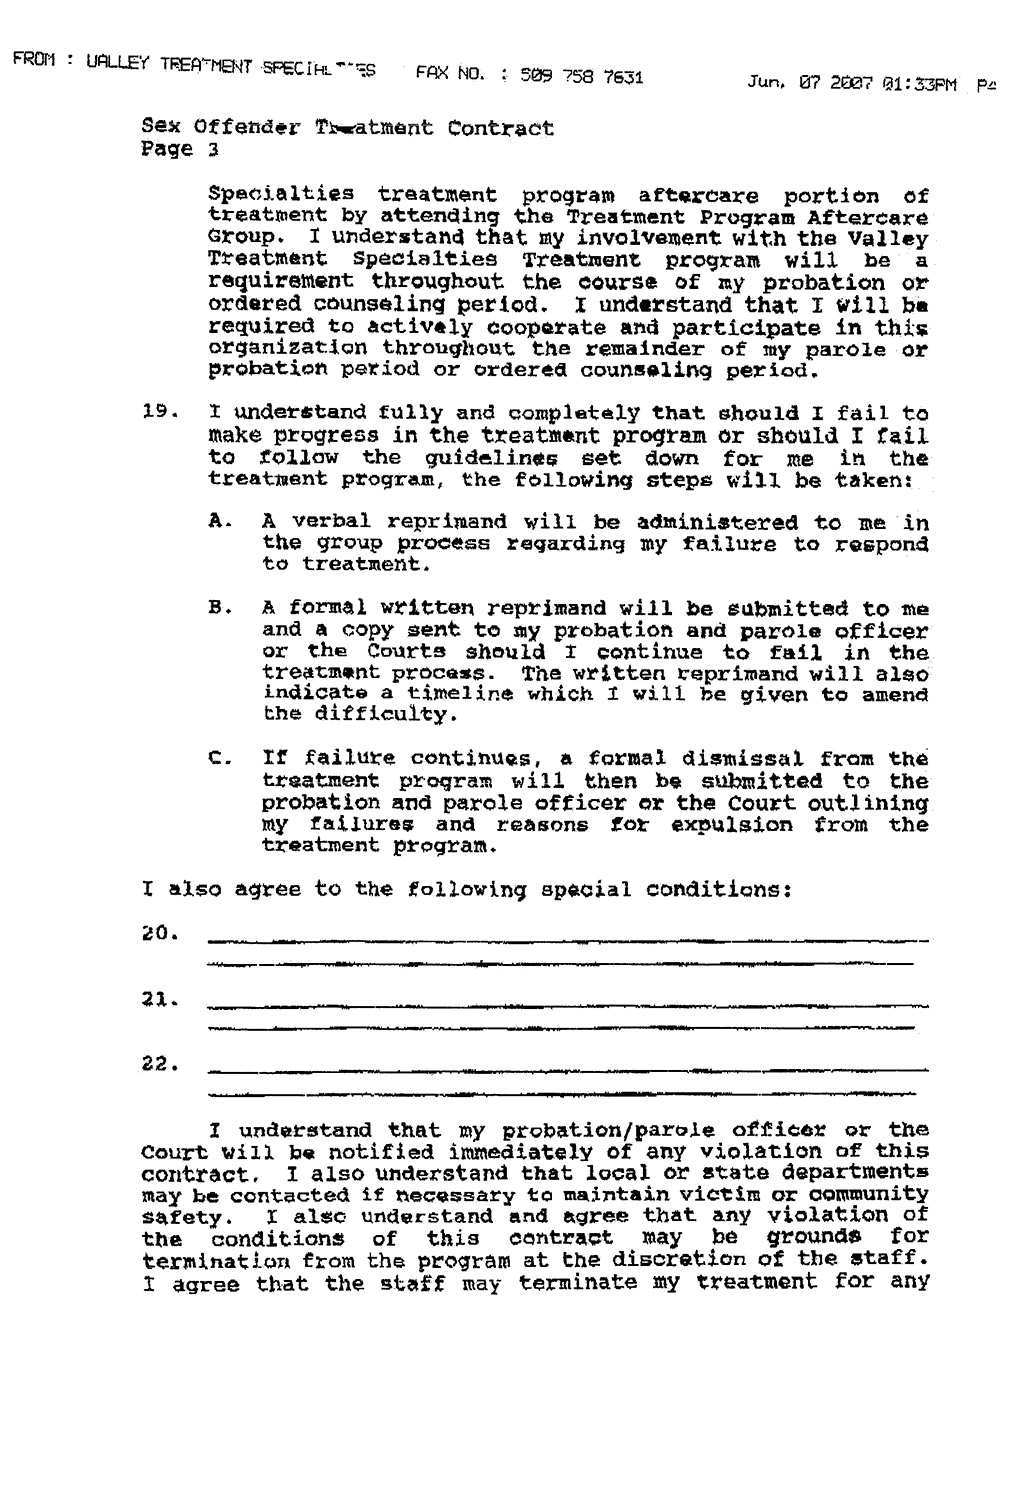 Valley Treatment Specialties Treatment Contract, page 3